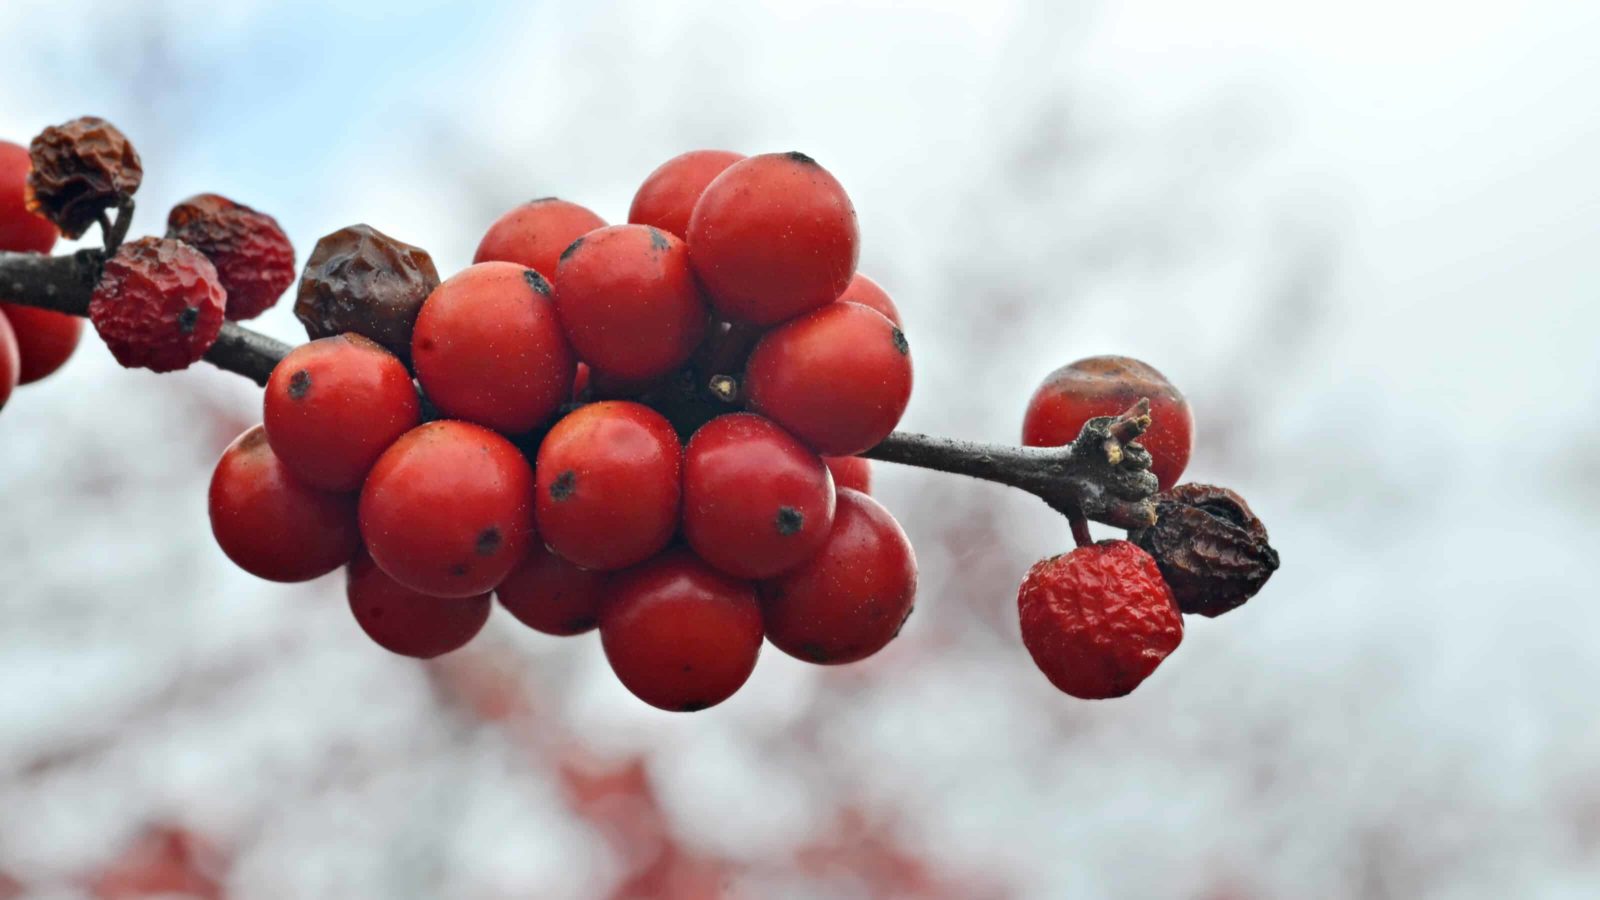 Winterberry turns red in the cold months.